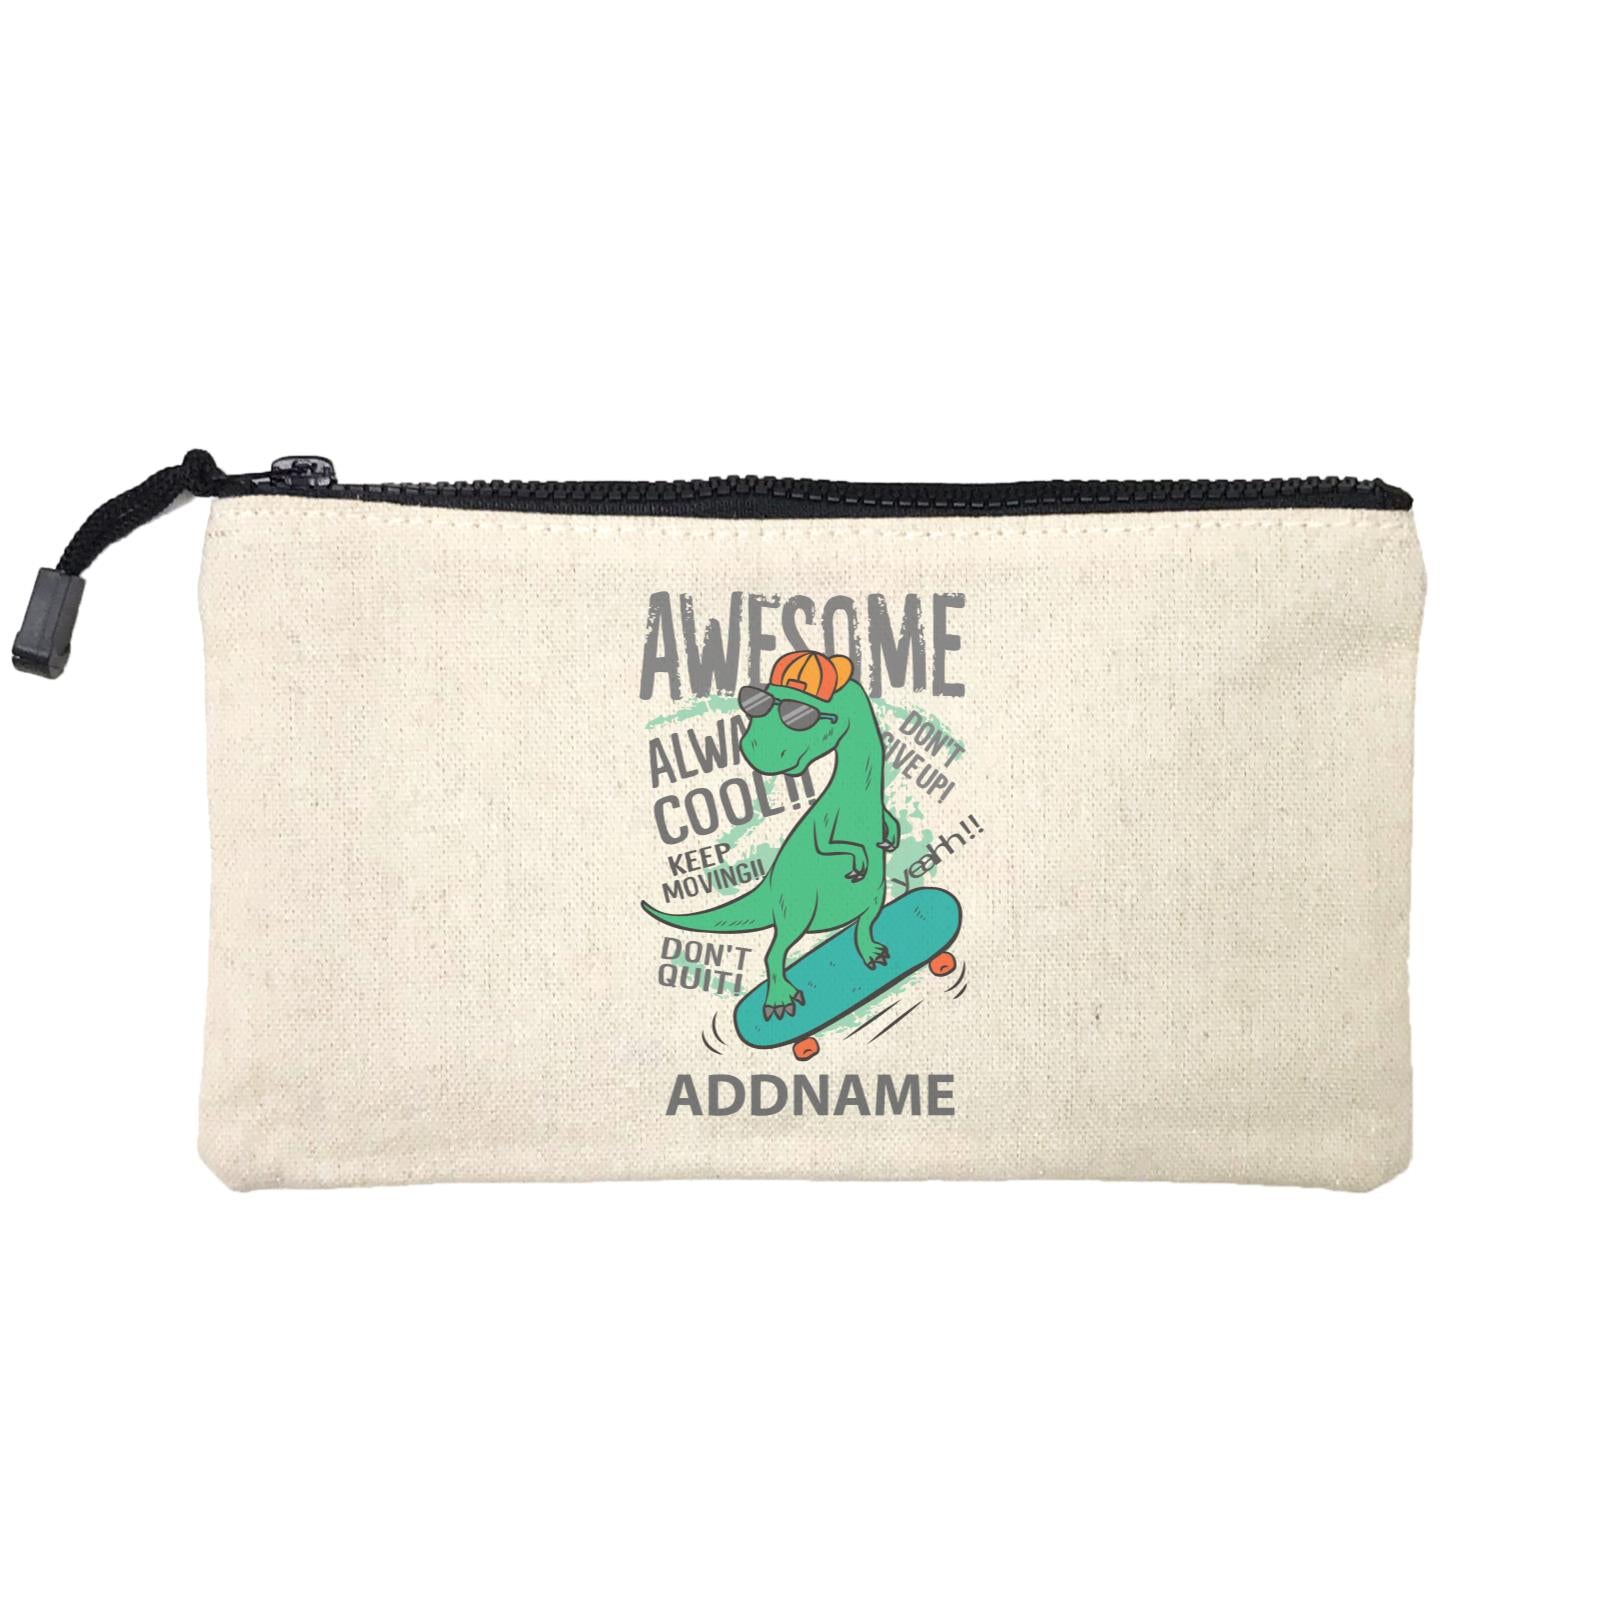 Cool Cute Dinosaur Awesome Always Cool Playing Skateboard Addname Mini Accessories Stationery Pouch